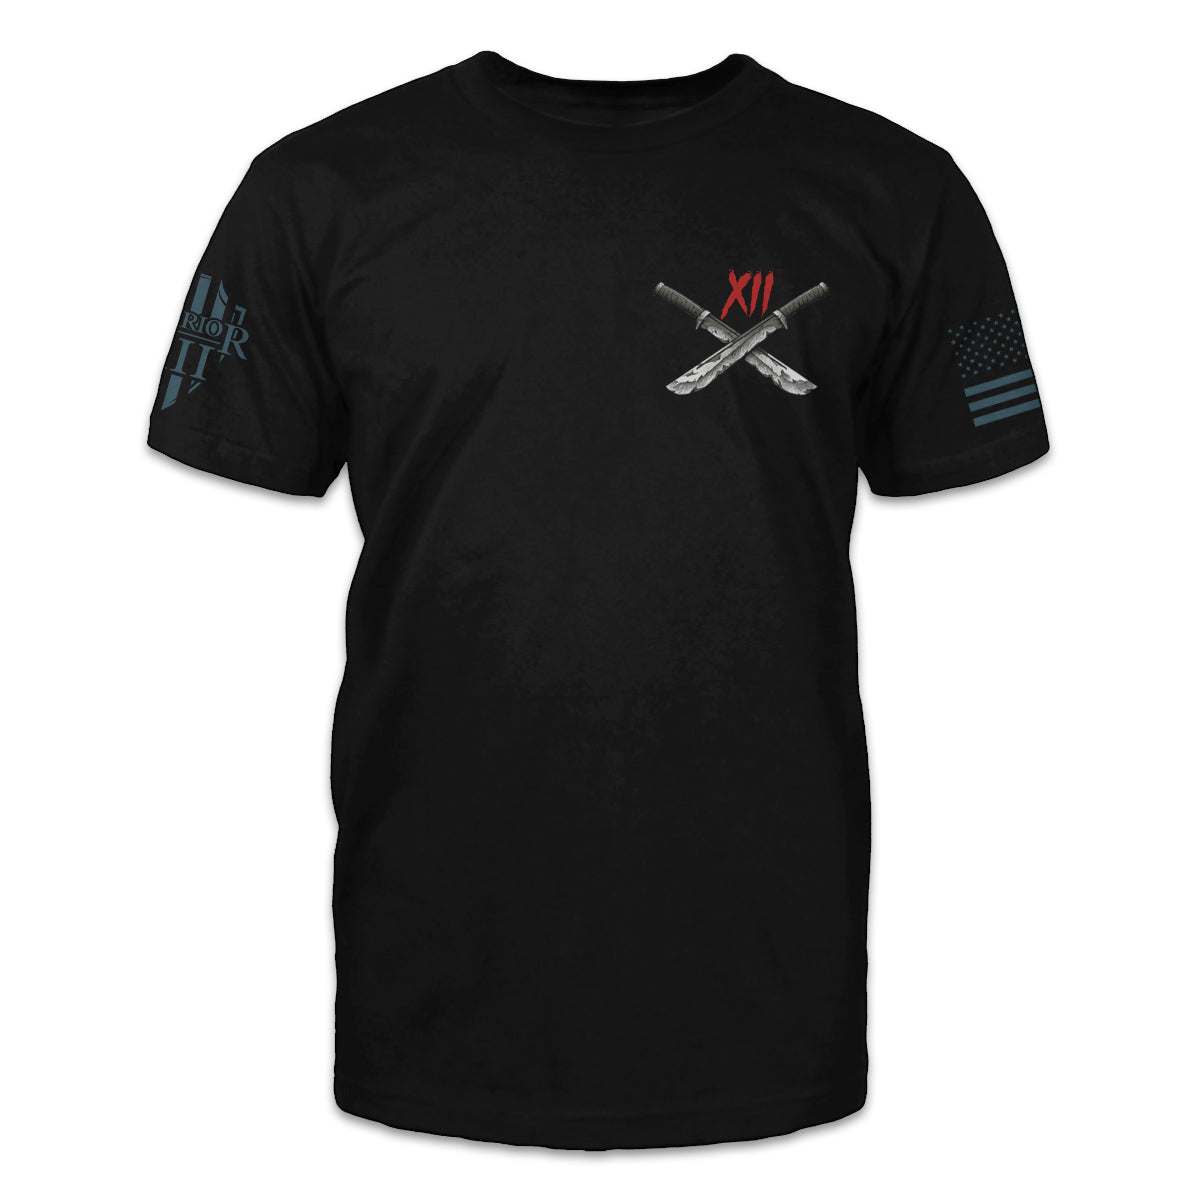 A black t-shirt with two machetes crossed over printed on the front of the shirt.